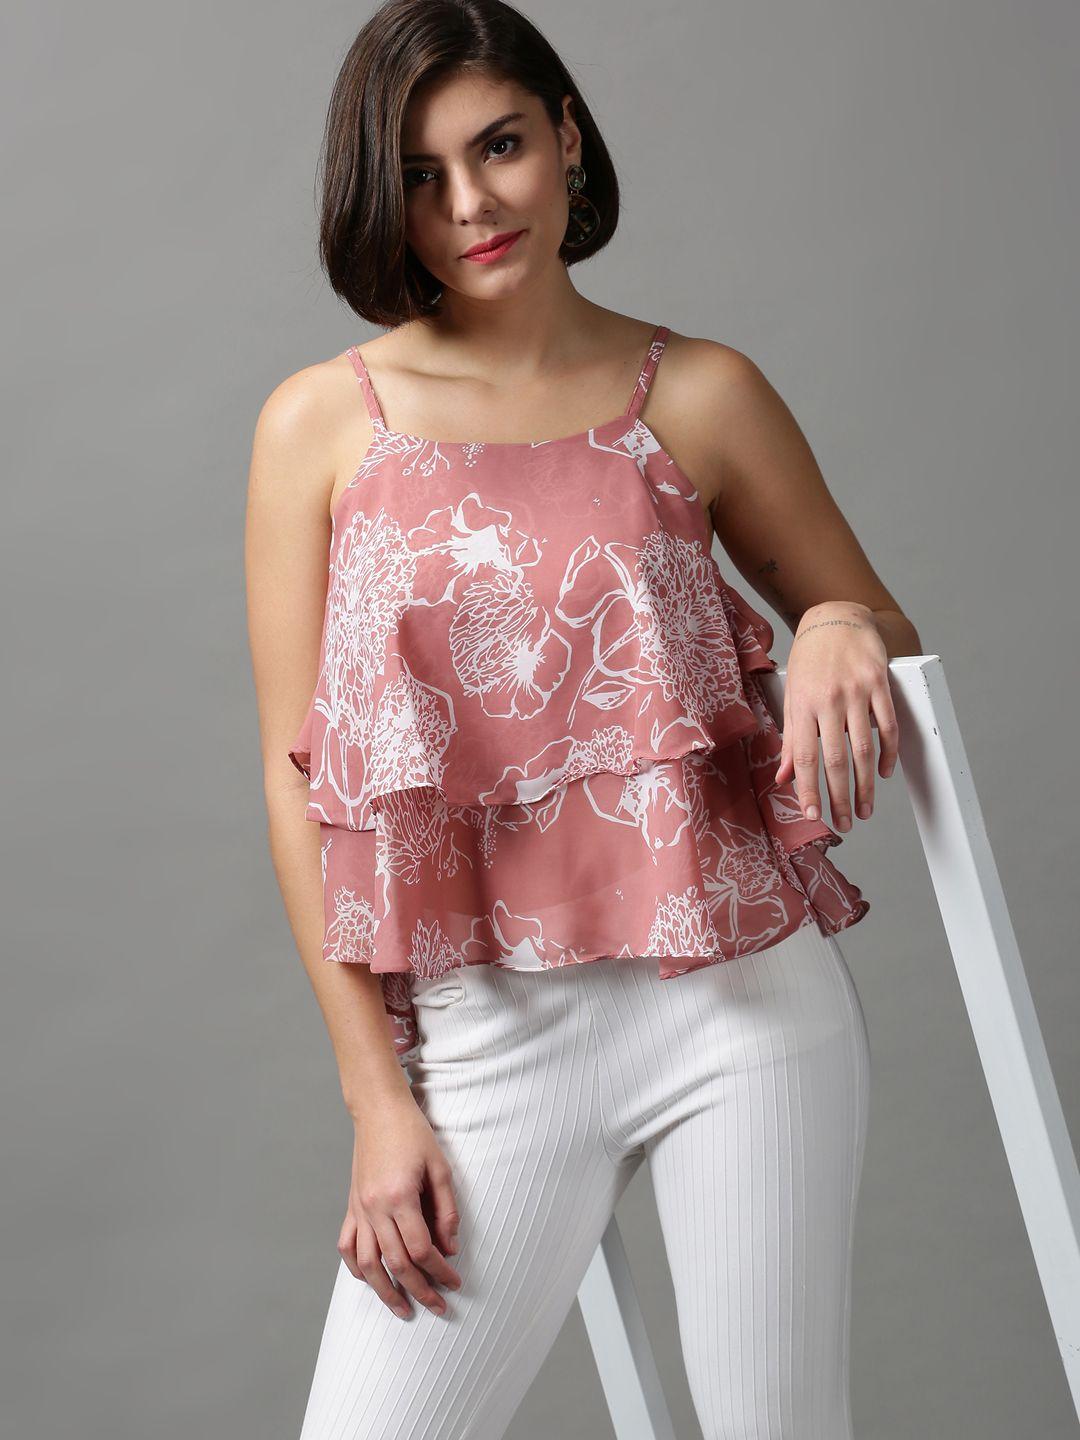 showoff-pink-&-white-floral-print-layered-chiffon-tiered-top